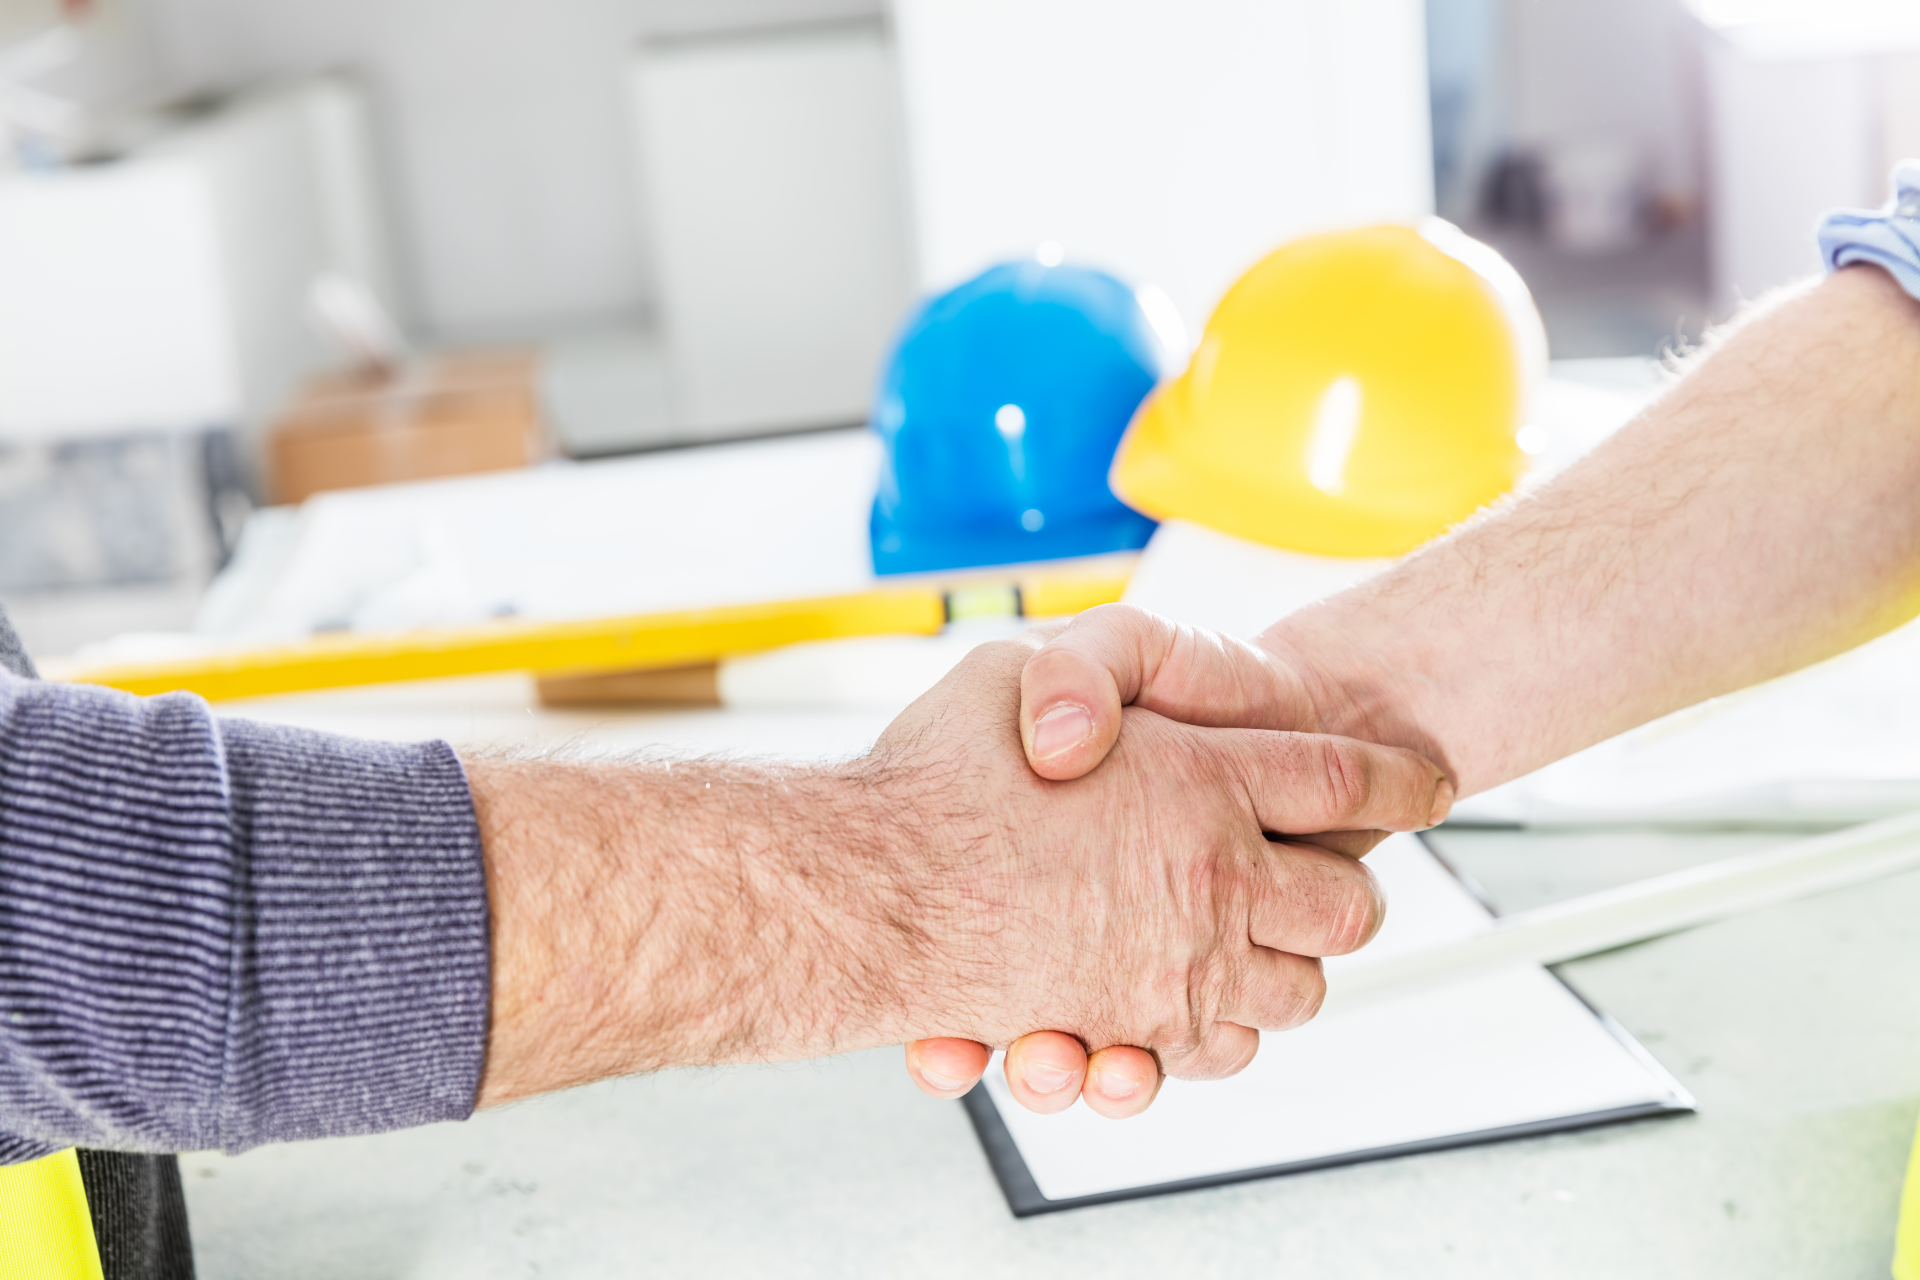 Two Construction Professionals shaking hands in front of a desk with hard hats and constructin plans on the desk